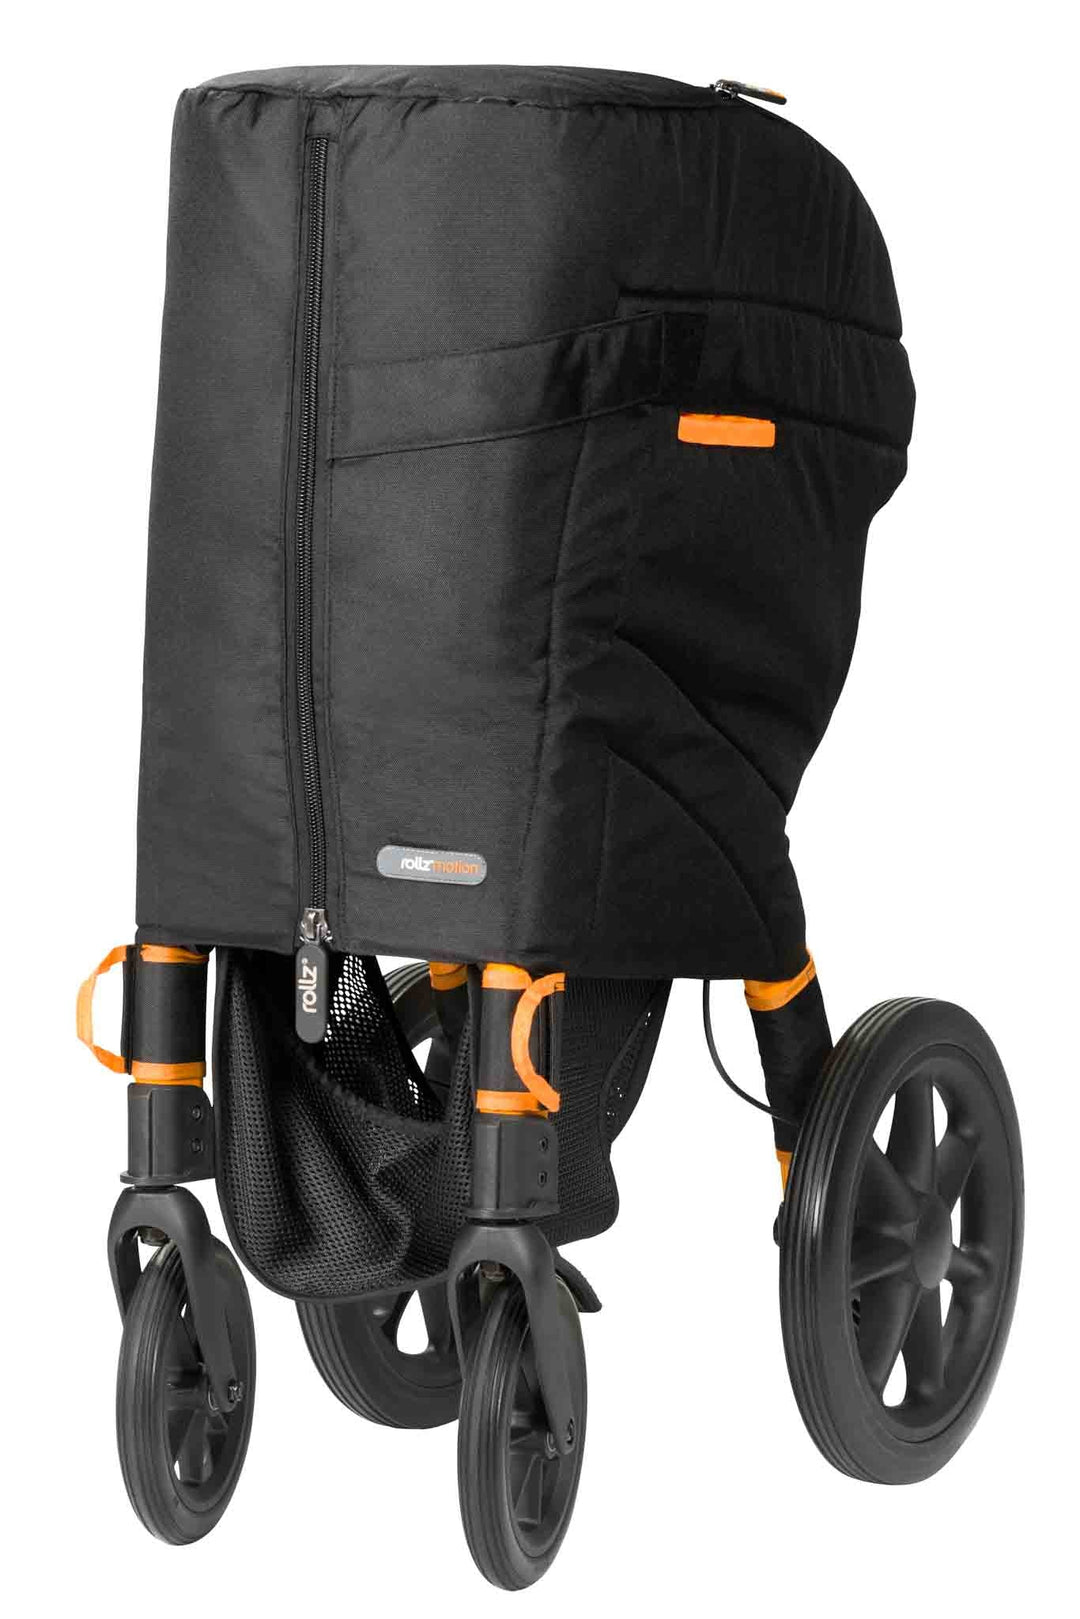 A 'Rollz Motion' walking frame inside a travel cover on a white background